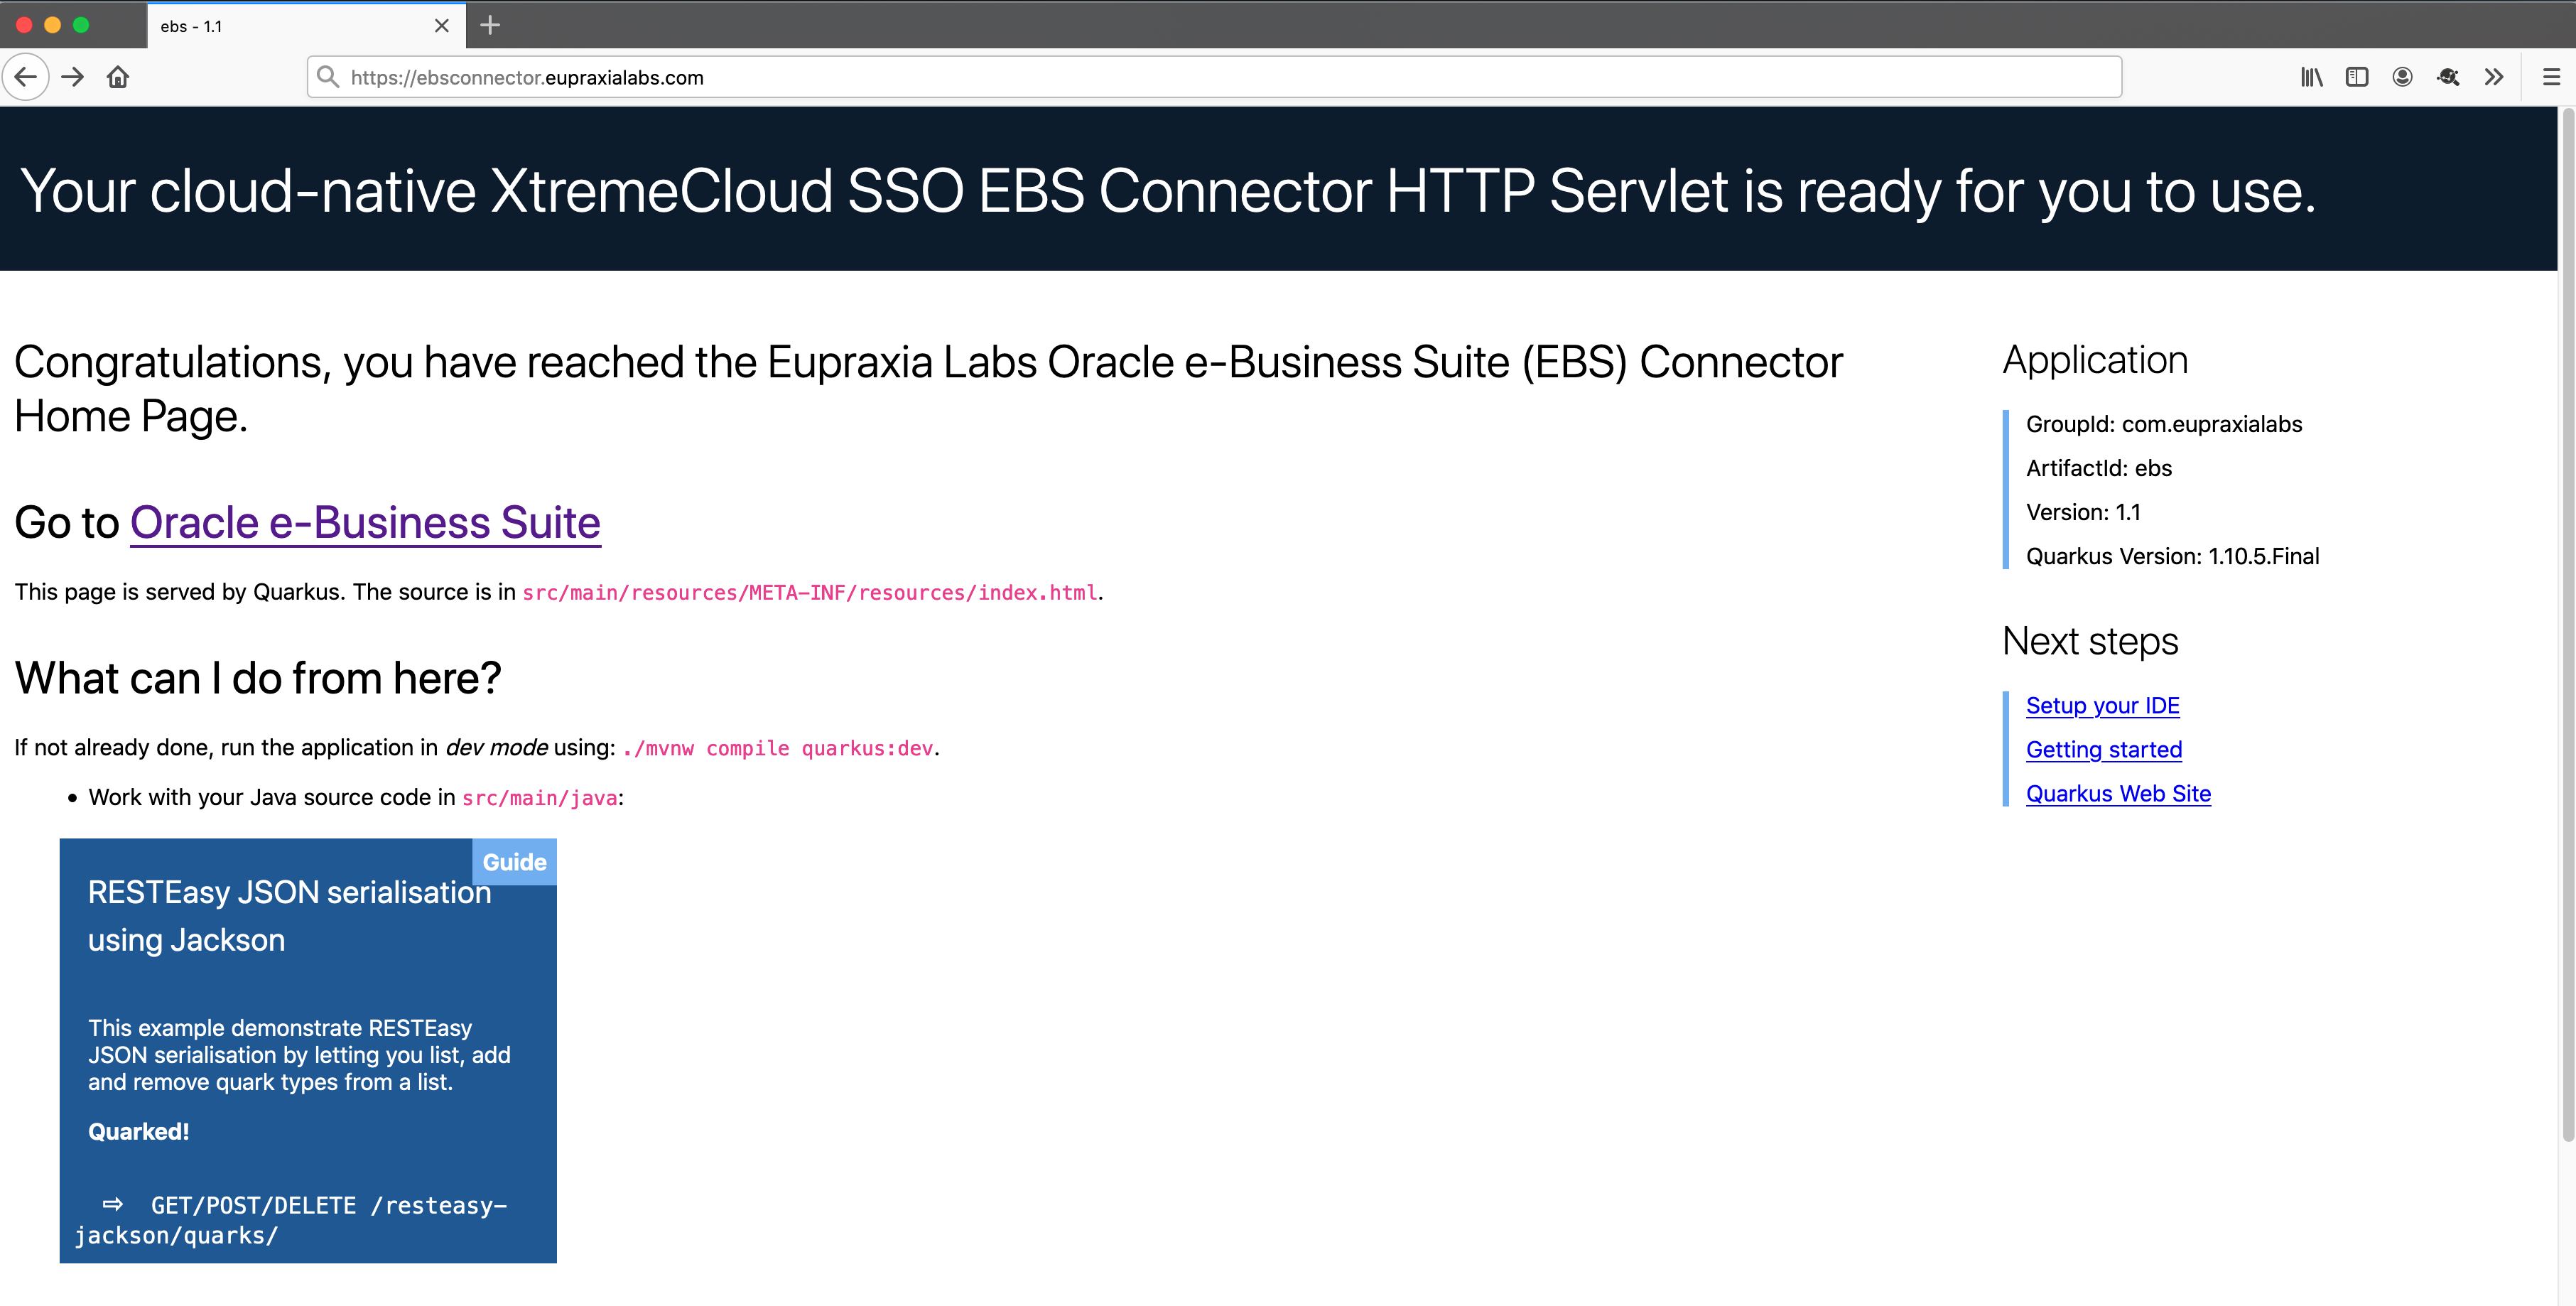 XtremeCloud SSO EBS Connector Servlet Unauthenticated Home Page